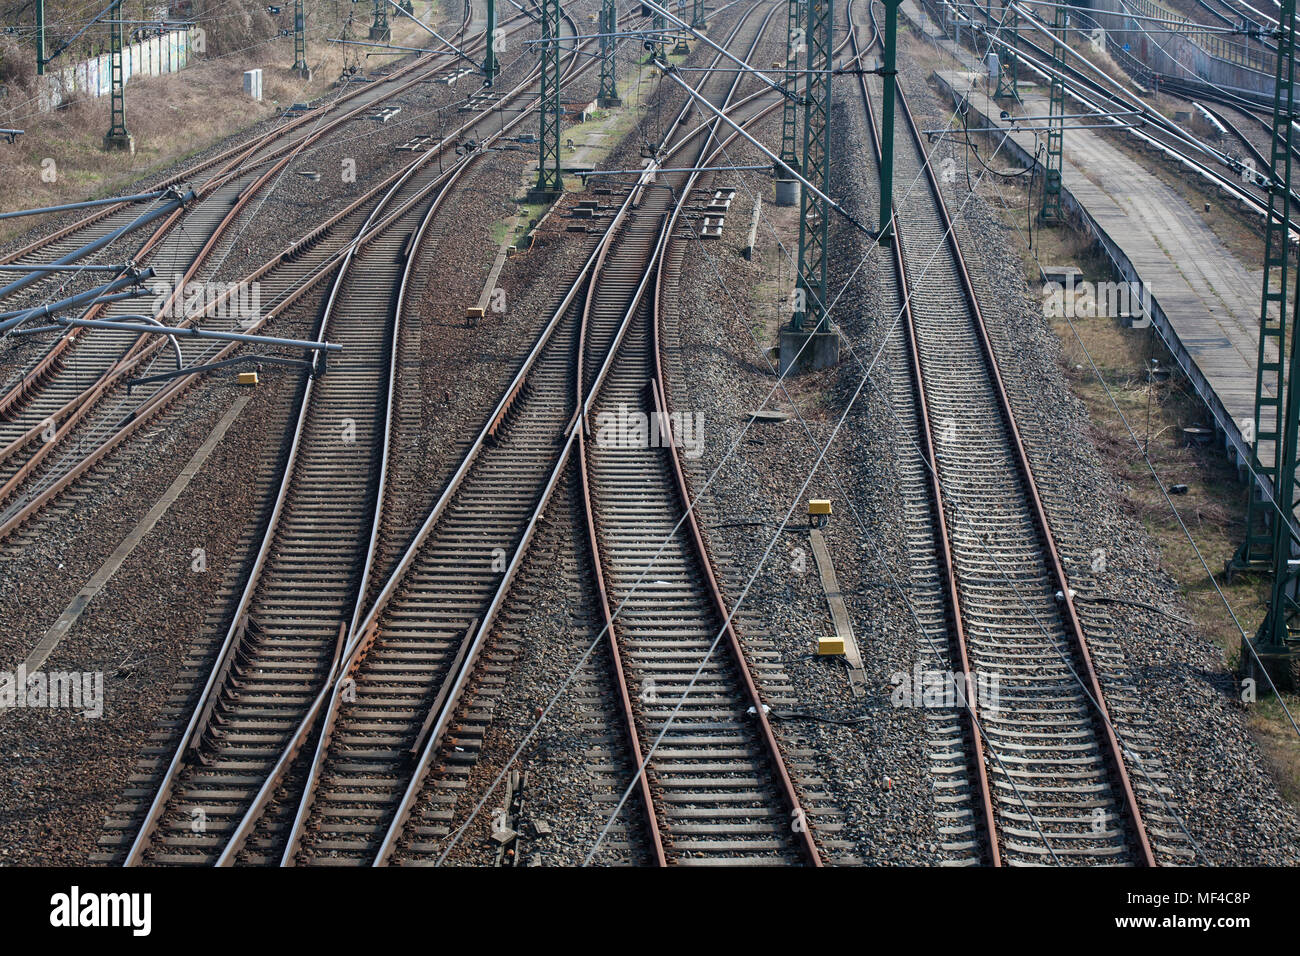 Train tracks with many options for ways forward with multiple switch points Stock Photo